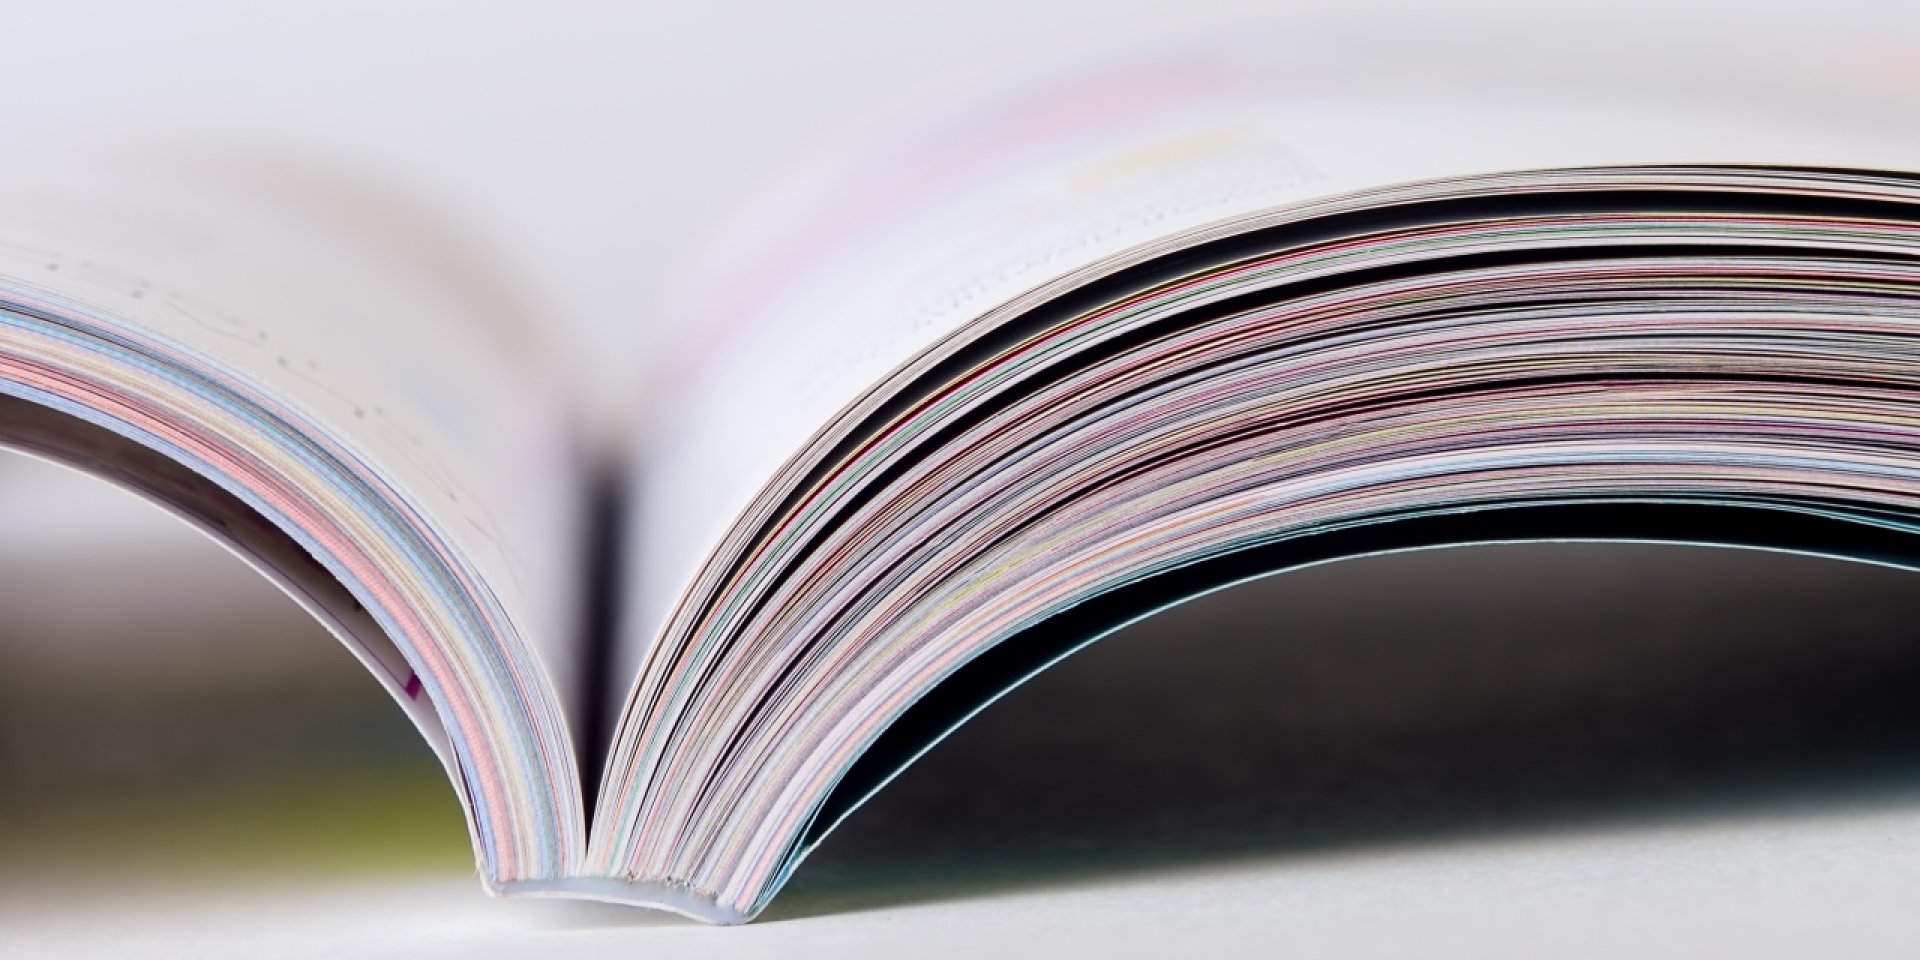 Colorful pages of an open magazine, close up. Selective focus.